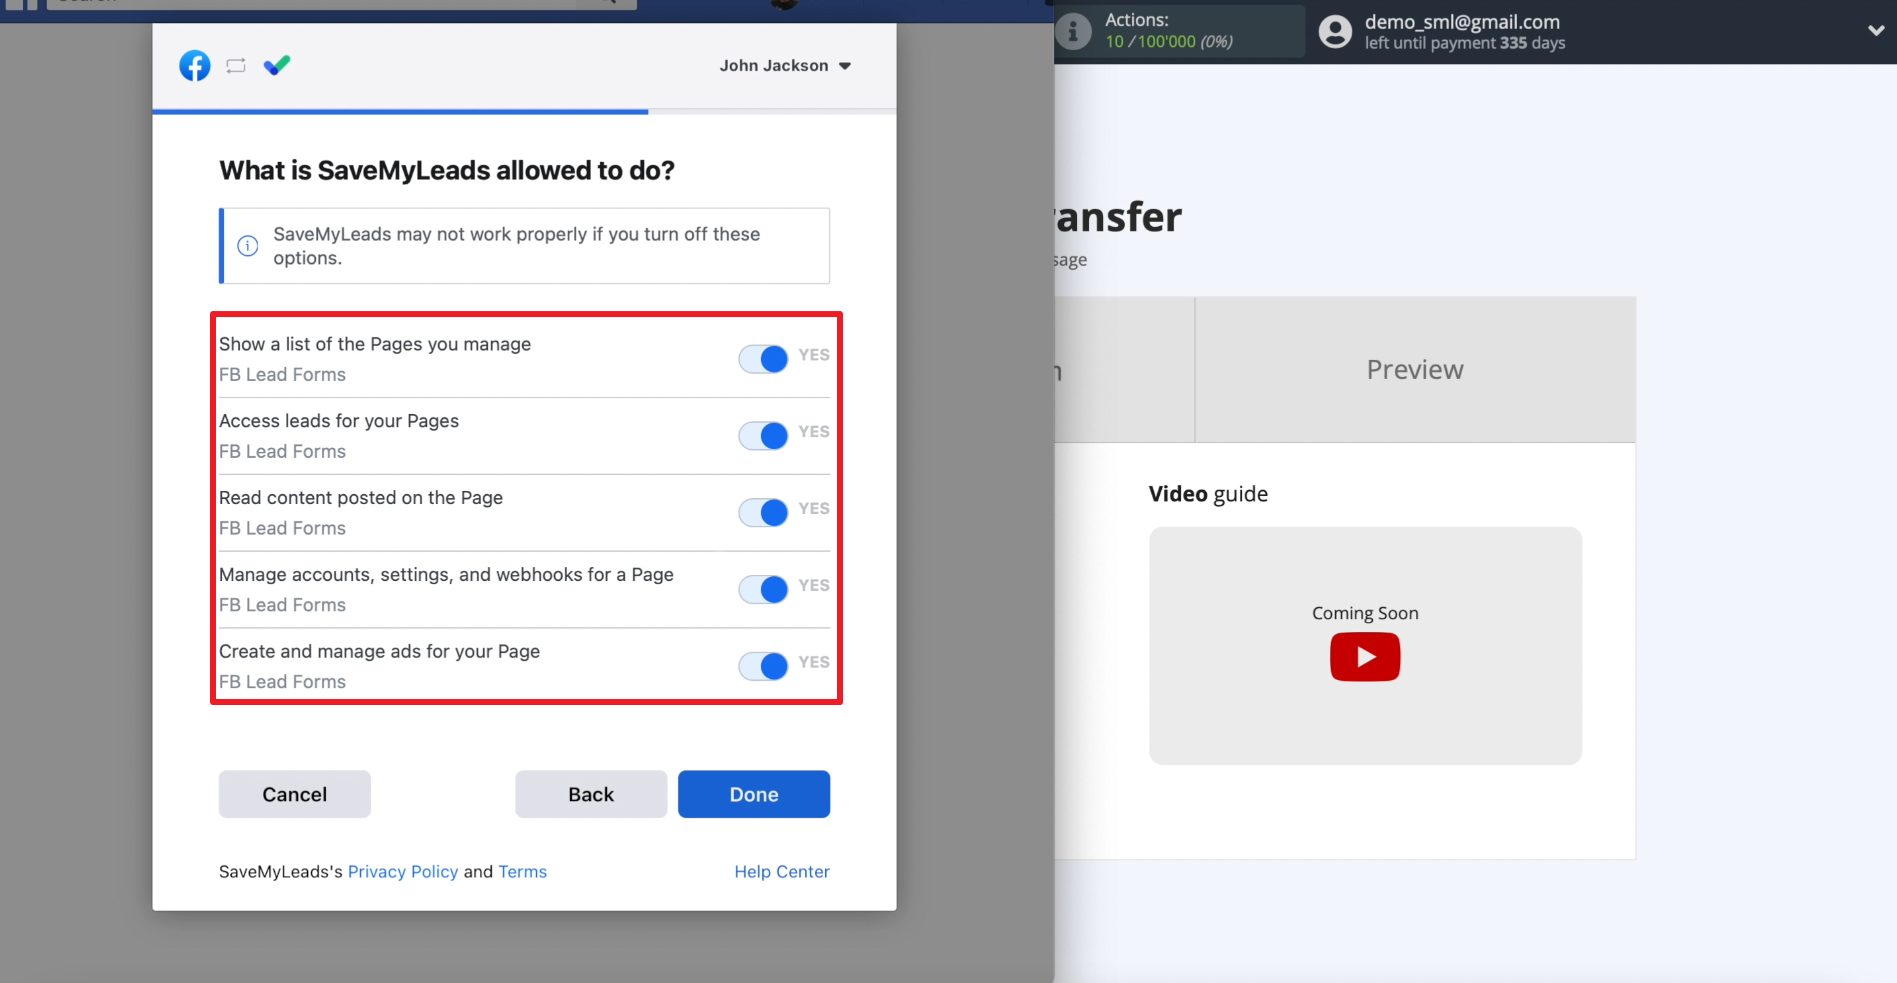 How to set up the upload of new leads from a Facebook advertising account in Telegram | Allow SaveMyLeads to upload leads